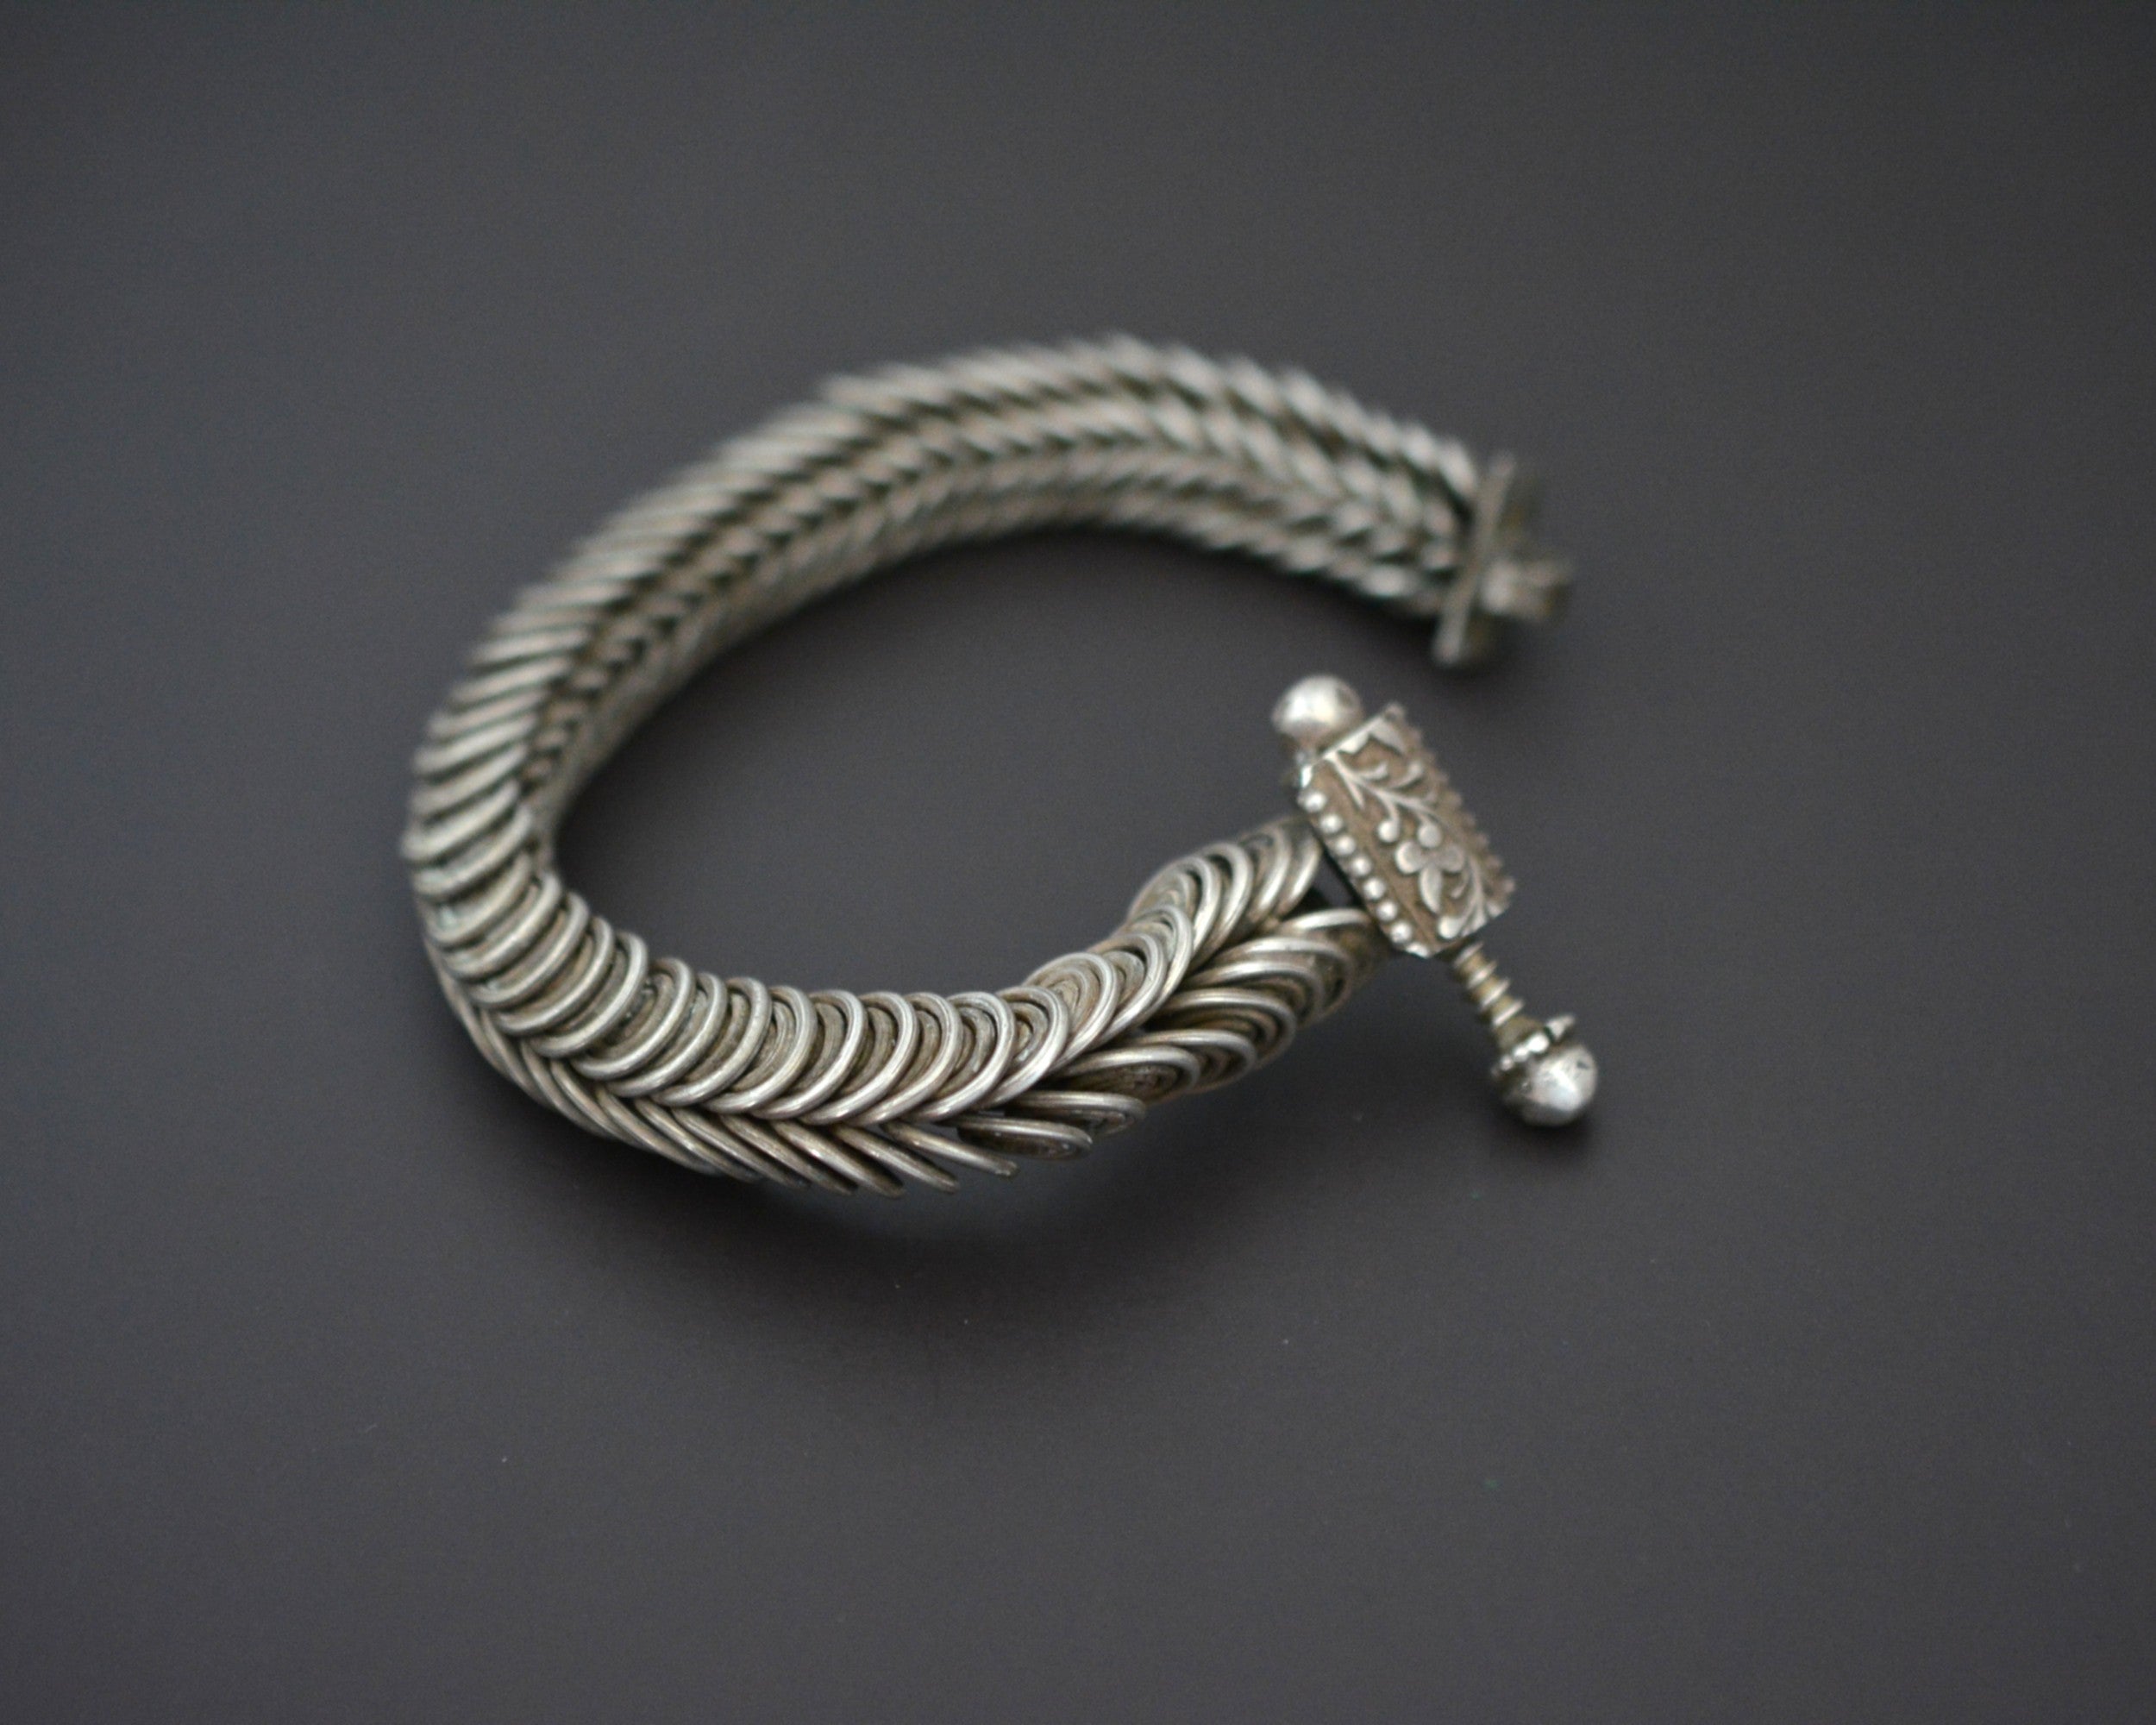 XSmall Ethnic Tribal Indian Silver Bracelet - Hinged - XS